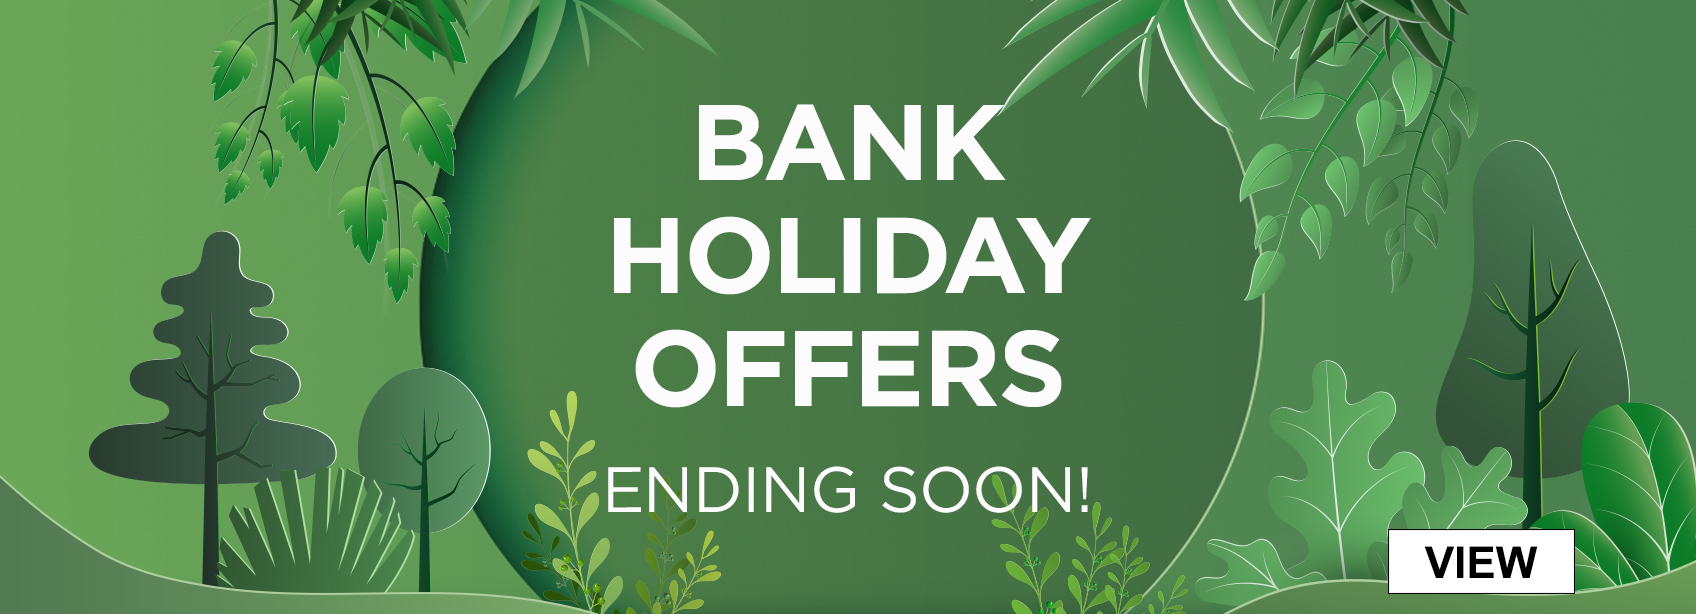 Bank Holiday Offers Ending Soon!